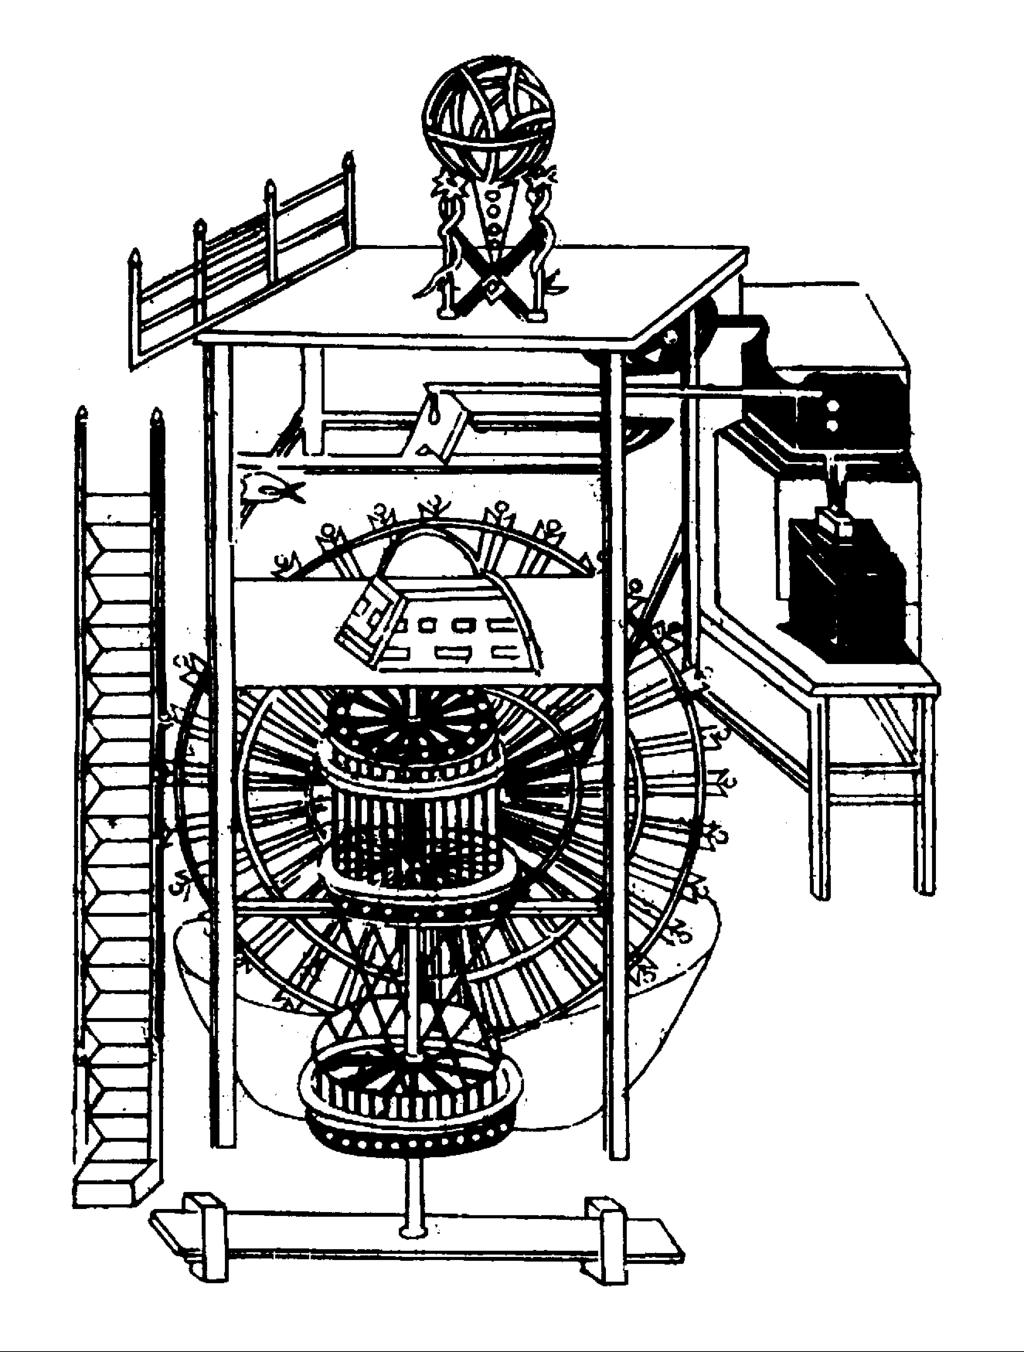 structure, components, and diagrams of the motion and structure of the water-powered clock tower.